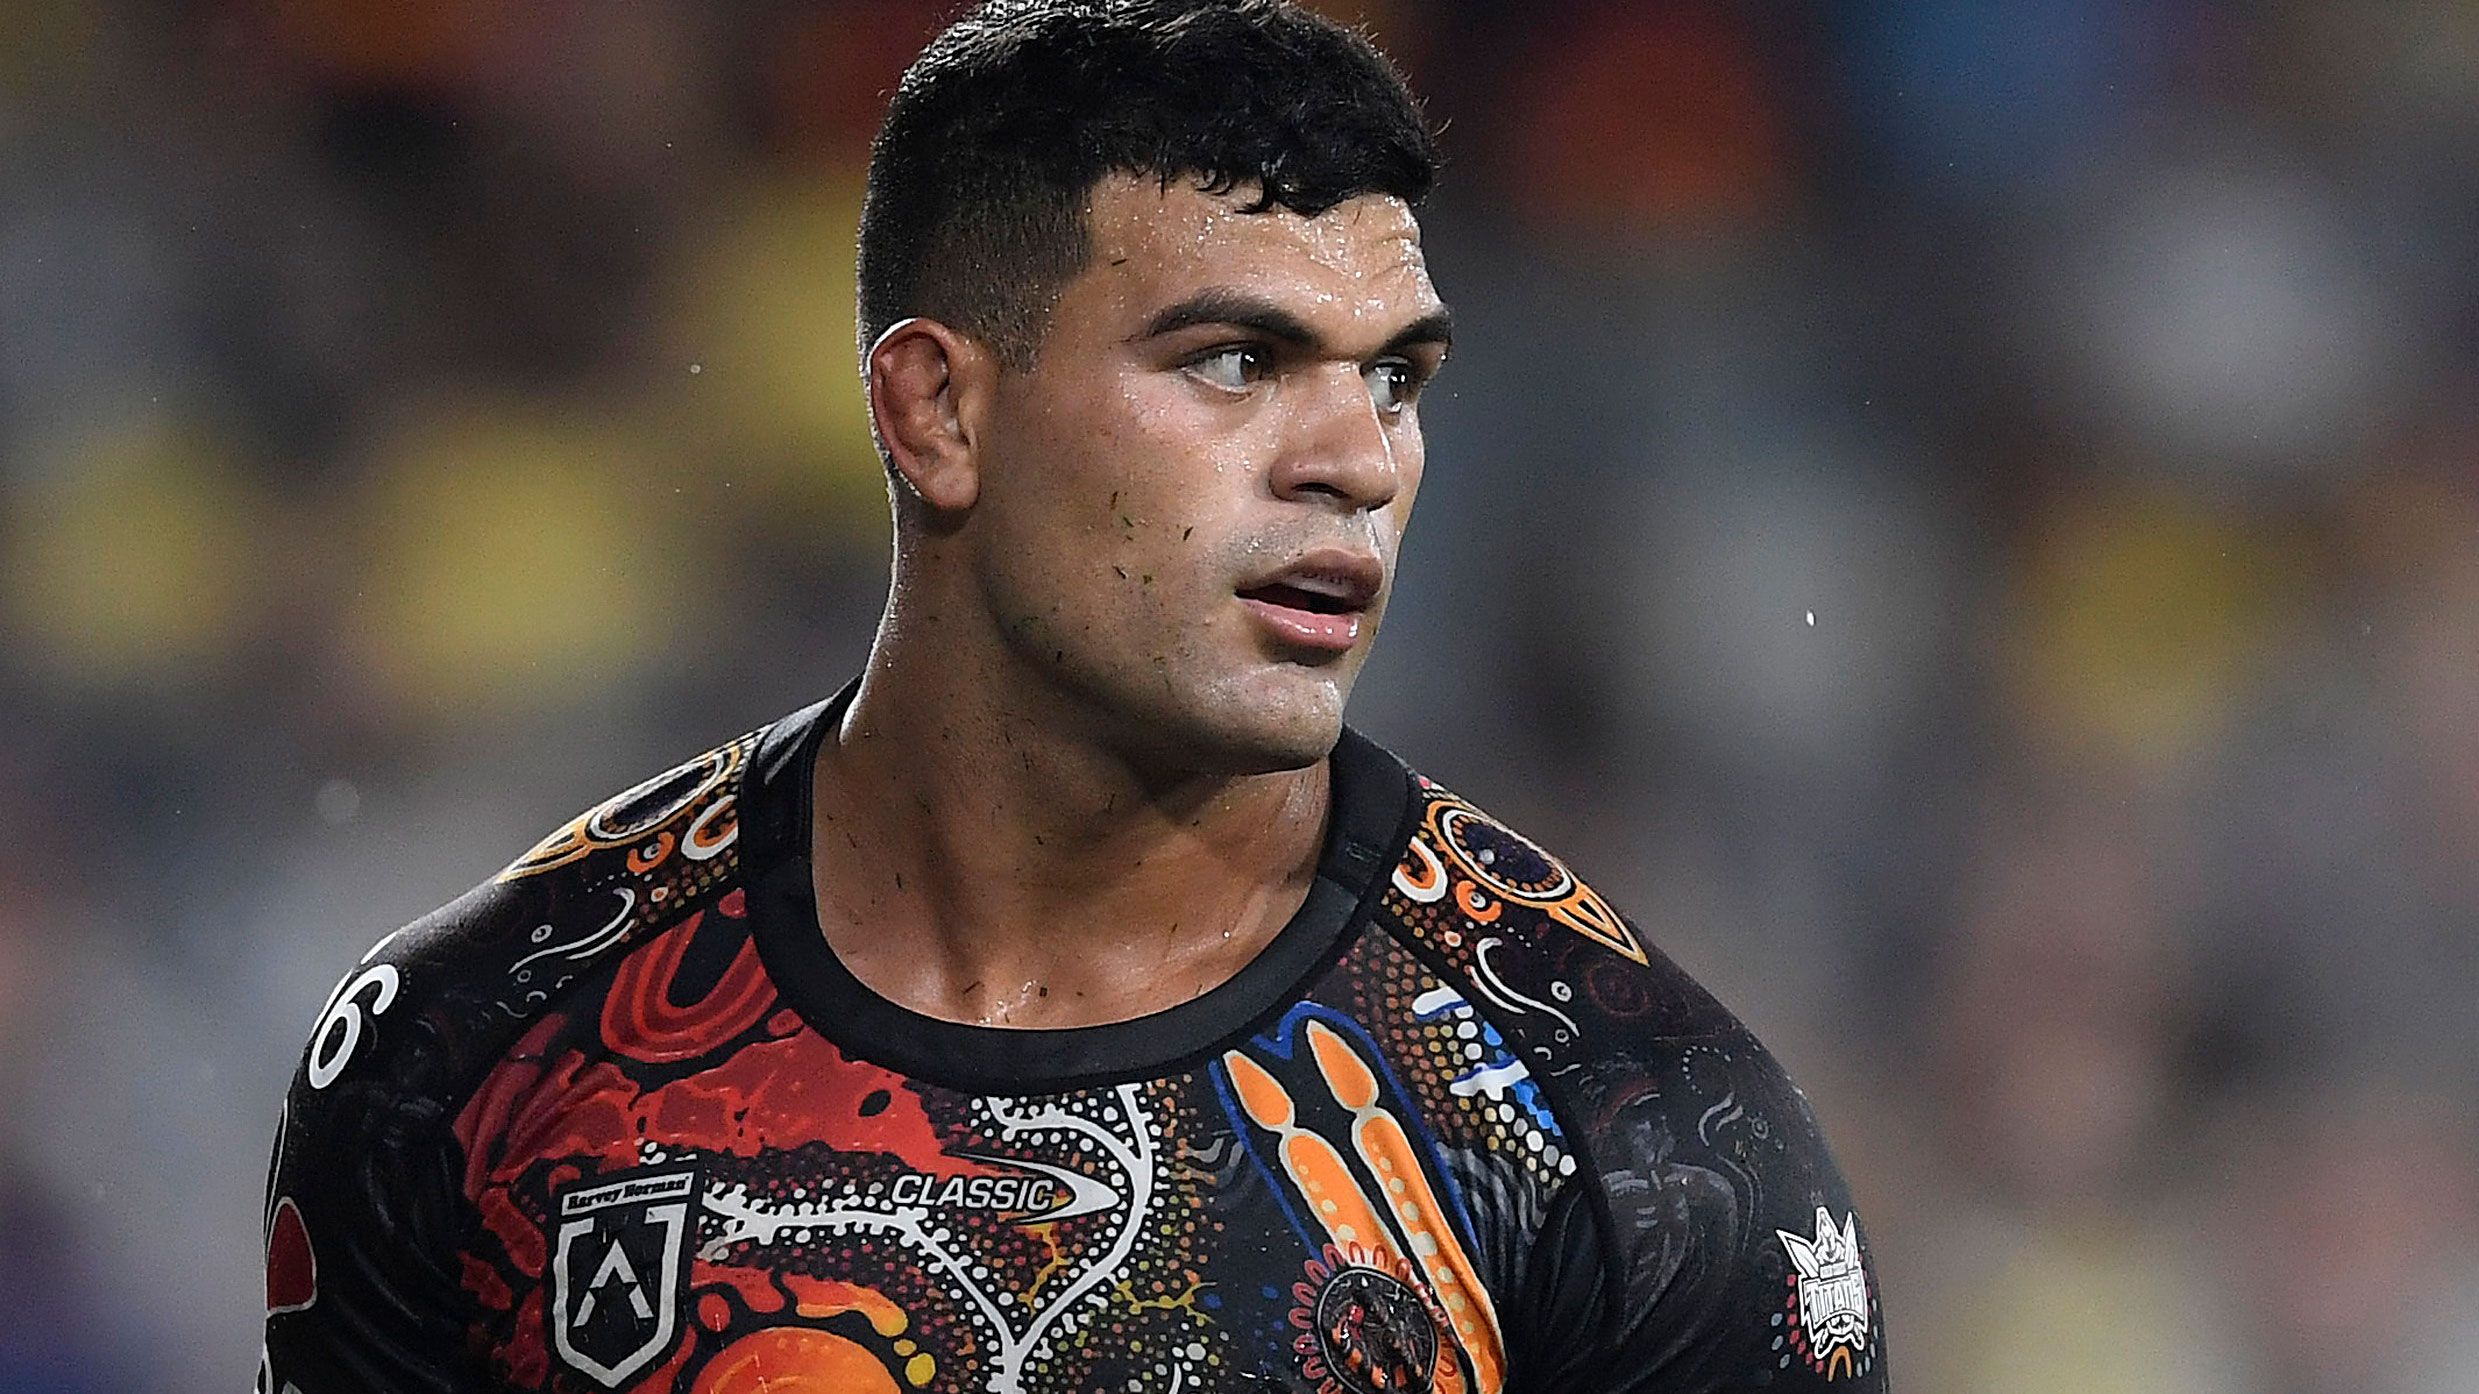 David Fifita, pictured playing for the Indigenous All Stars on Saturday night.